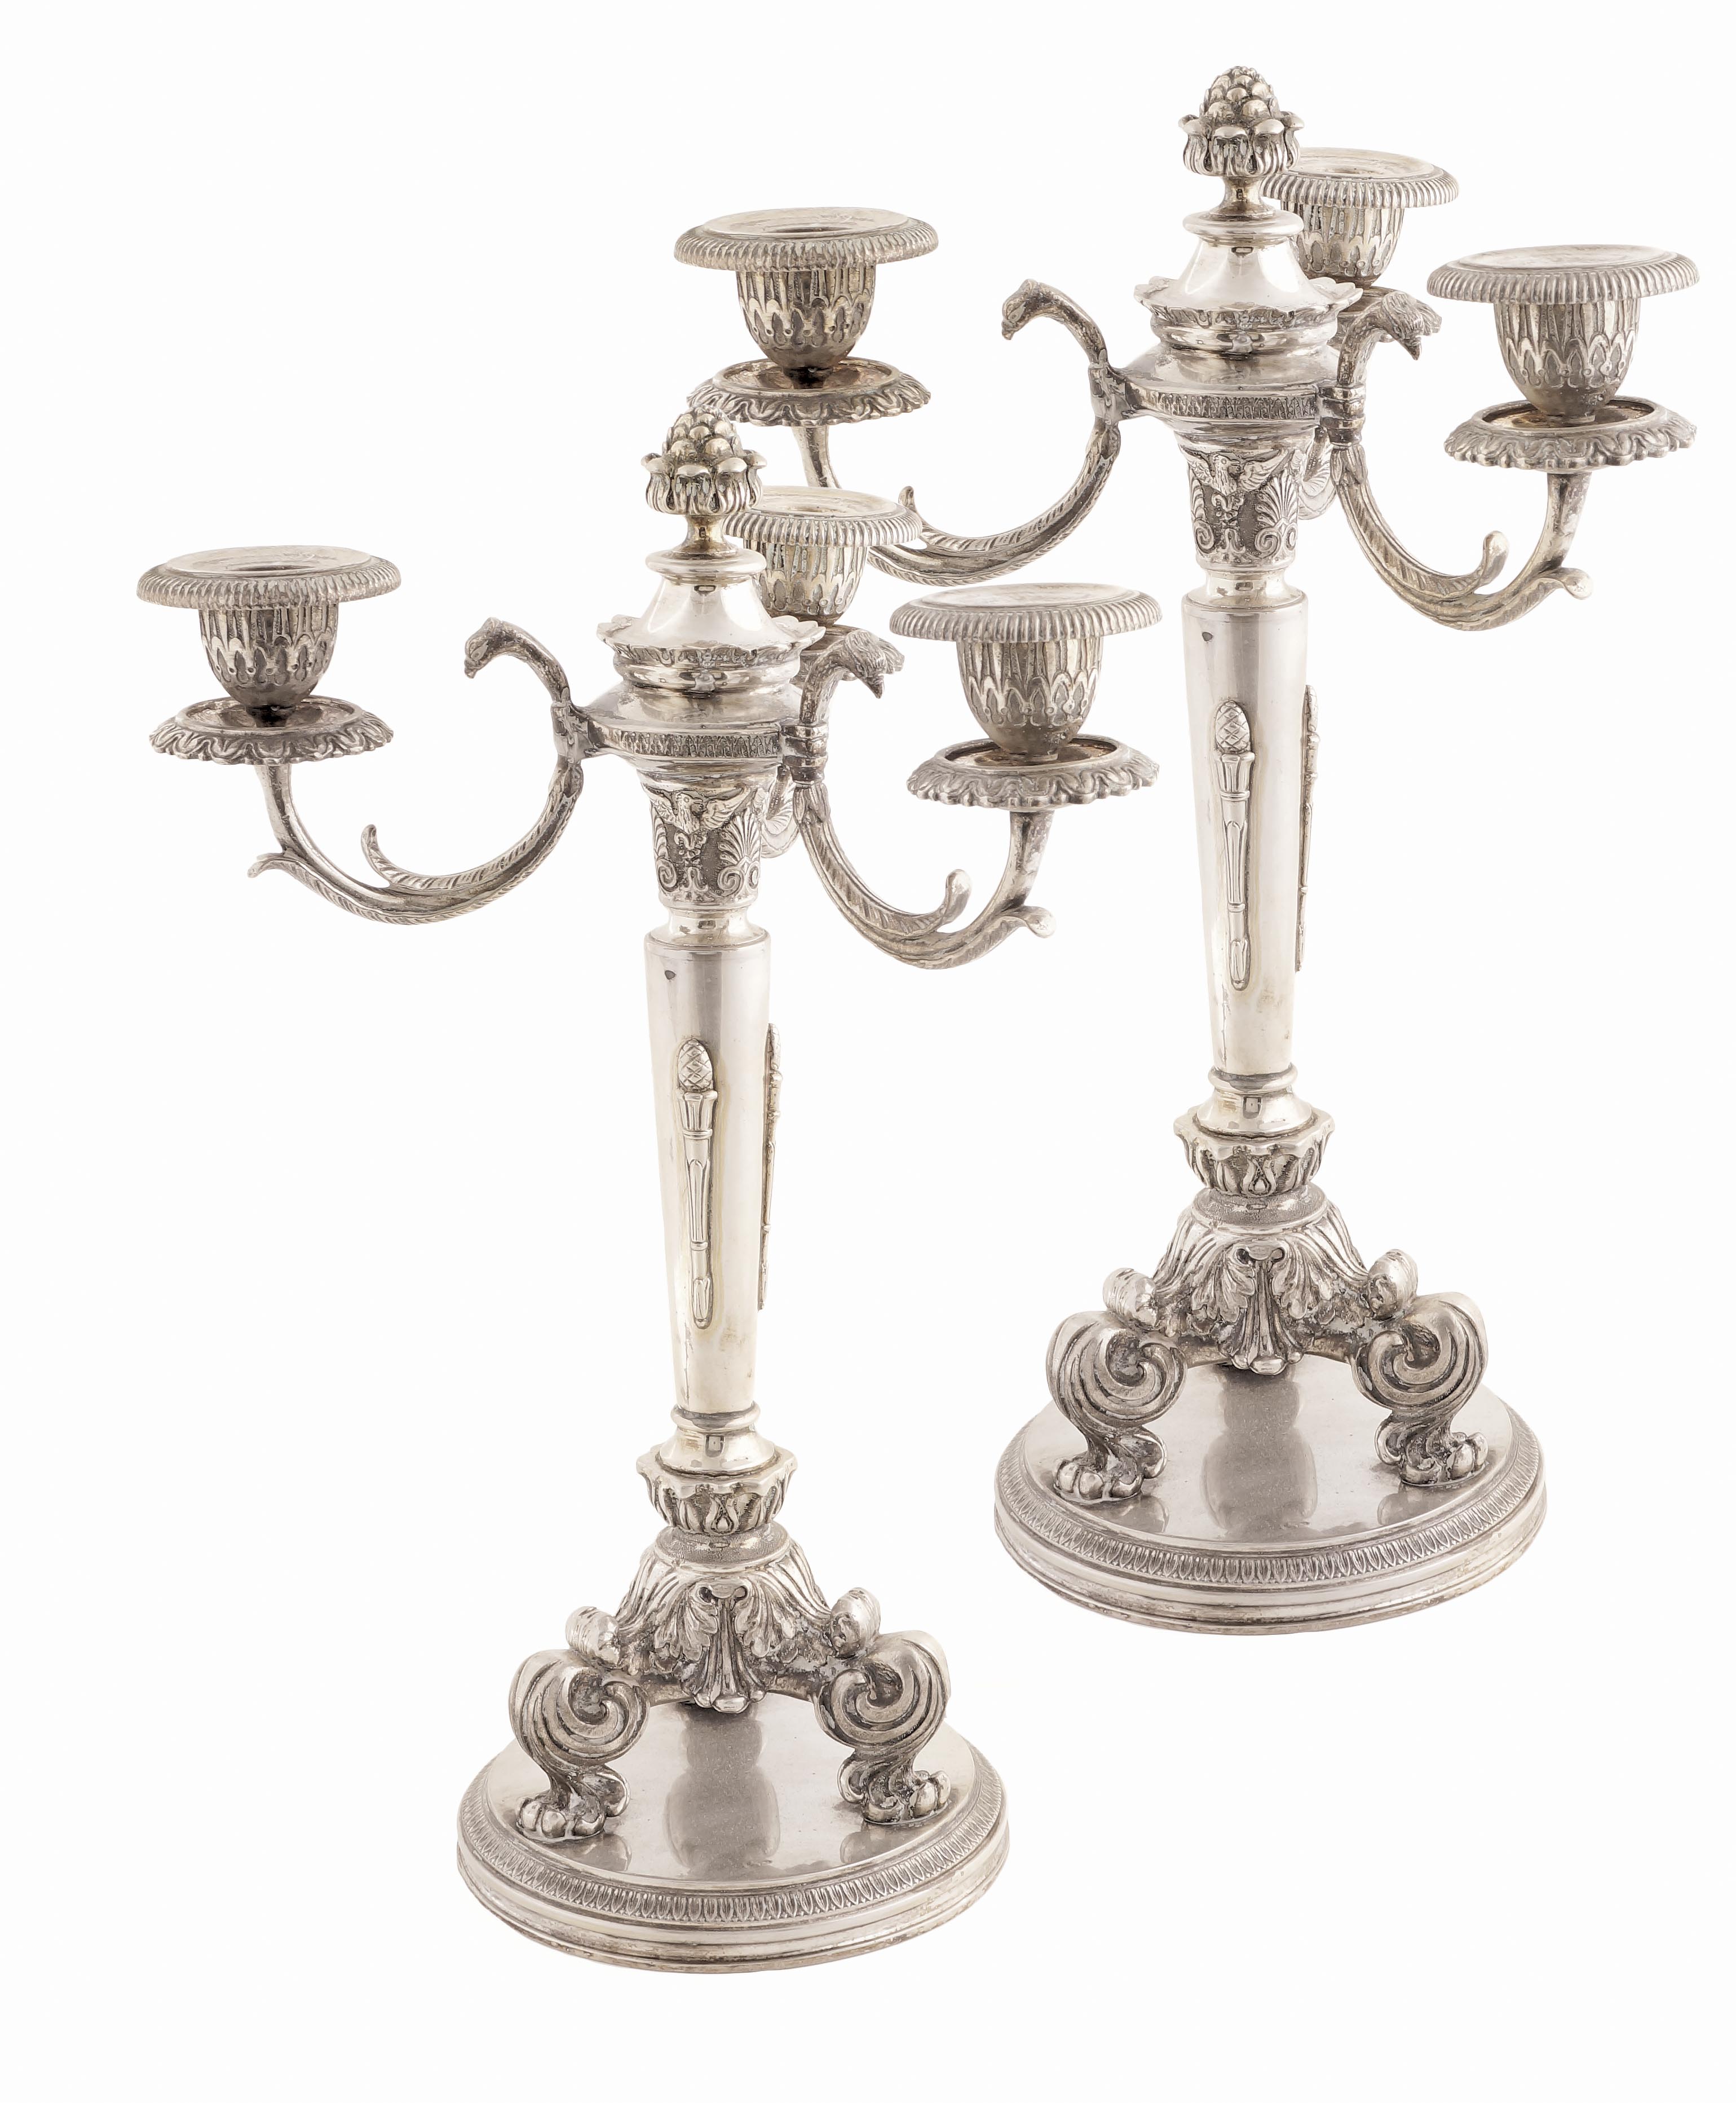 A pair of Italian silver three-branch candelabra Repoussé and chasing decorations mid-20th century